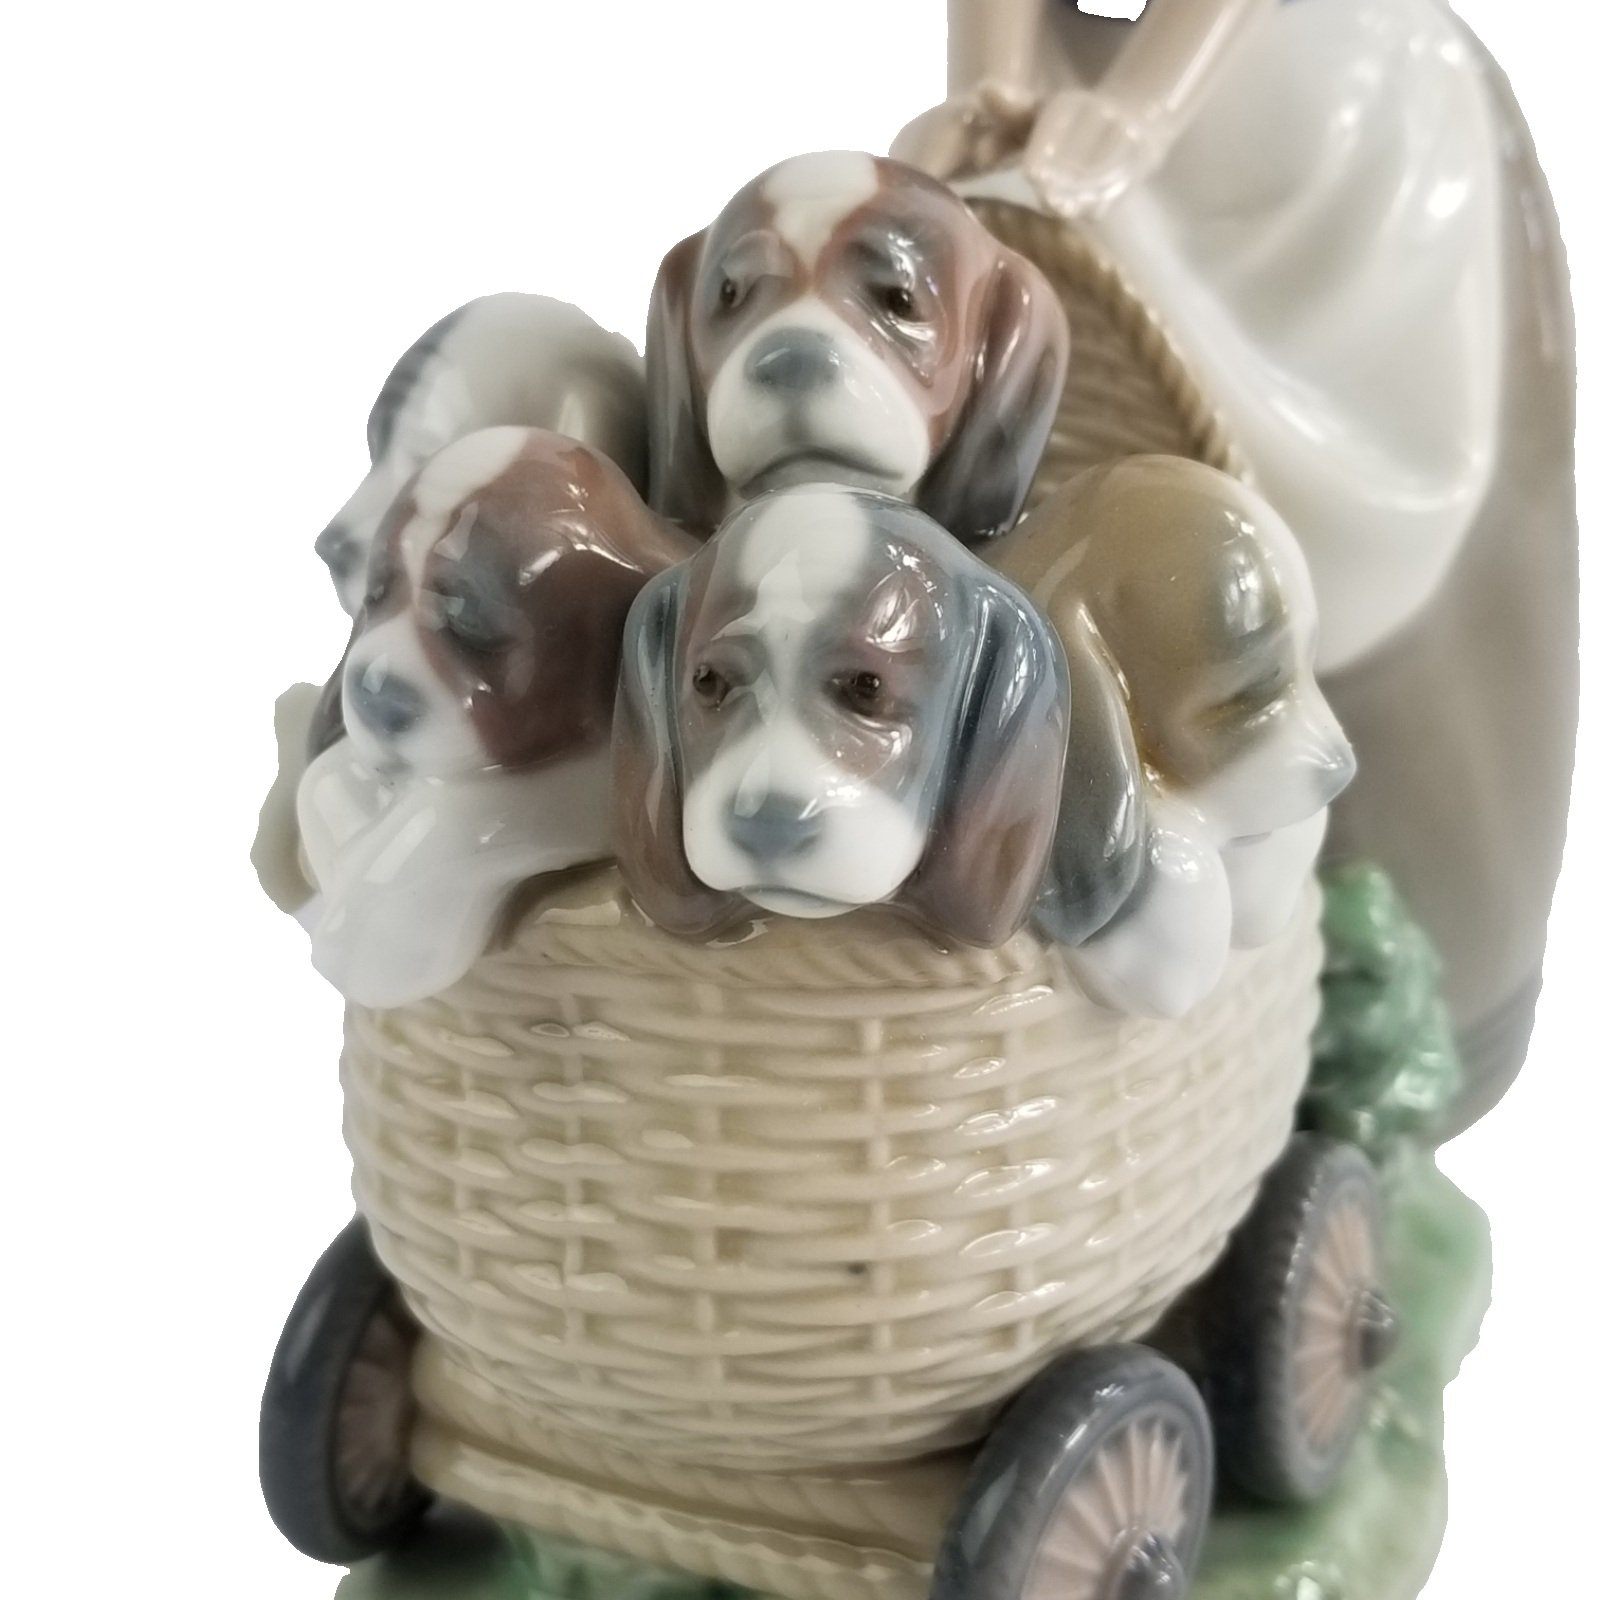 Lladro Litter of Fun 5364 Girl with Stroller Full of Puppies 